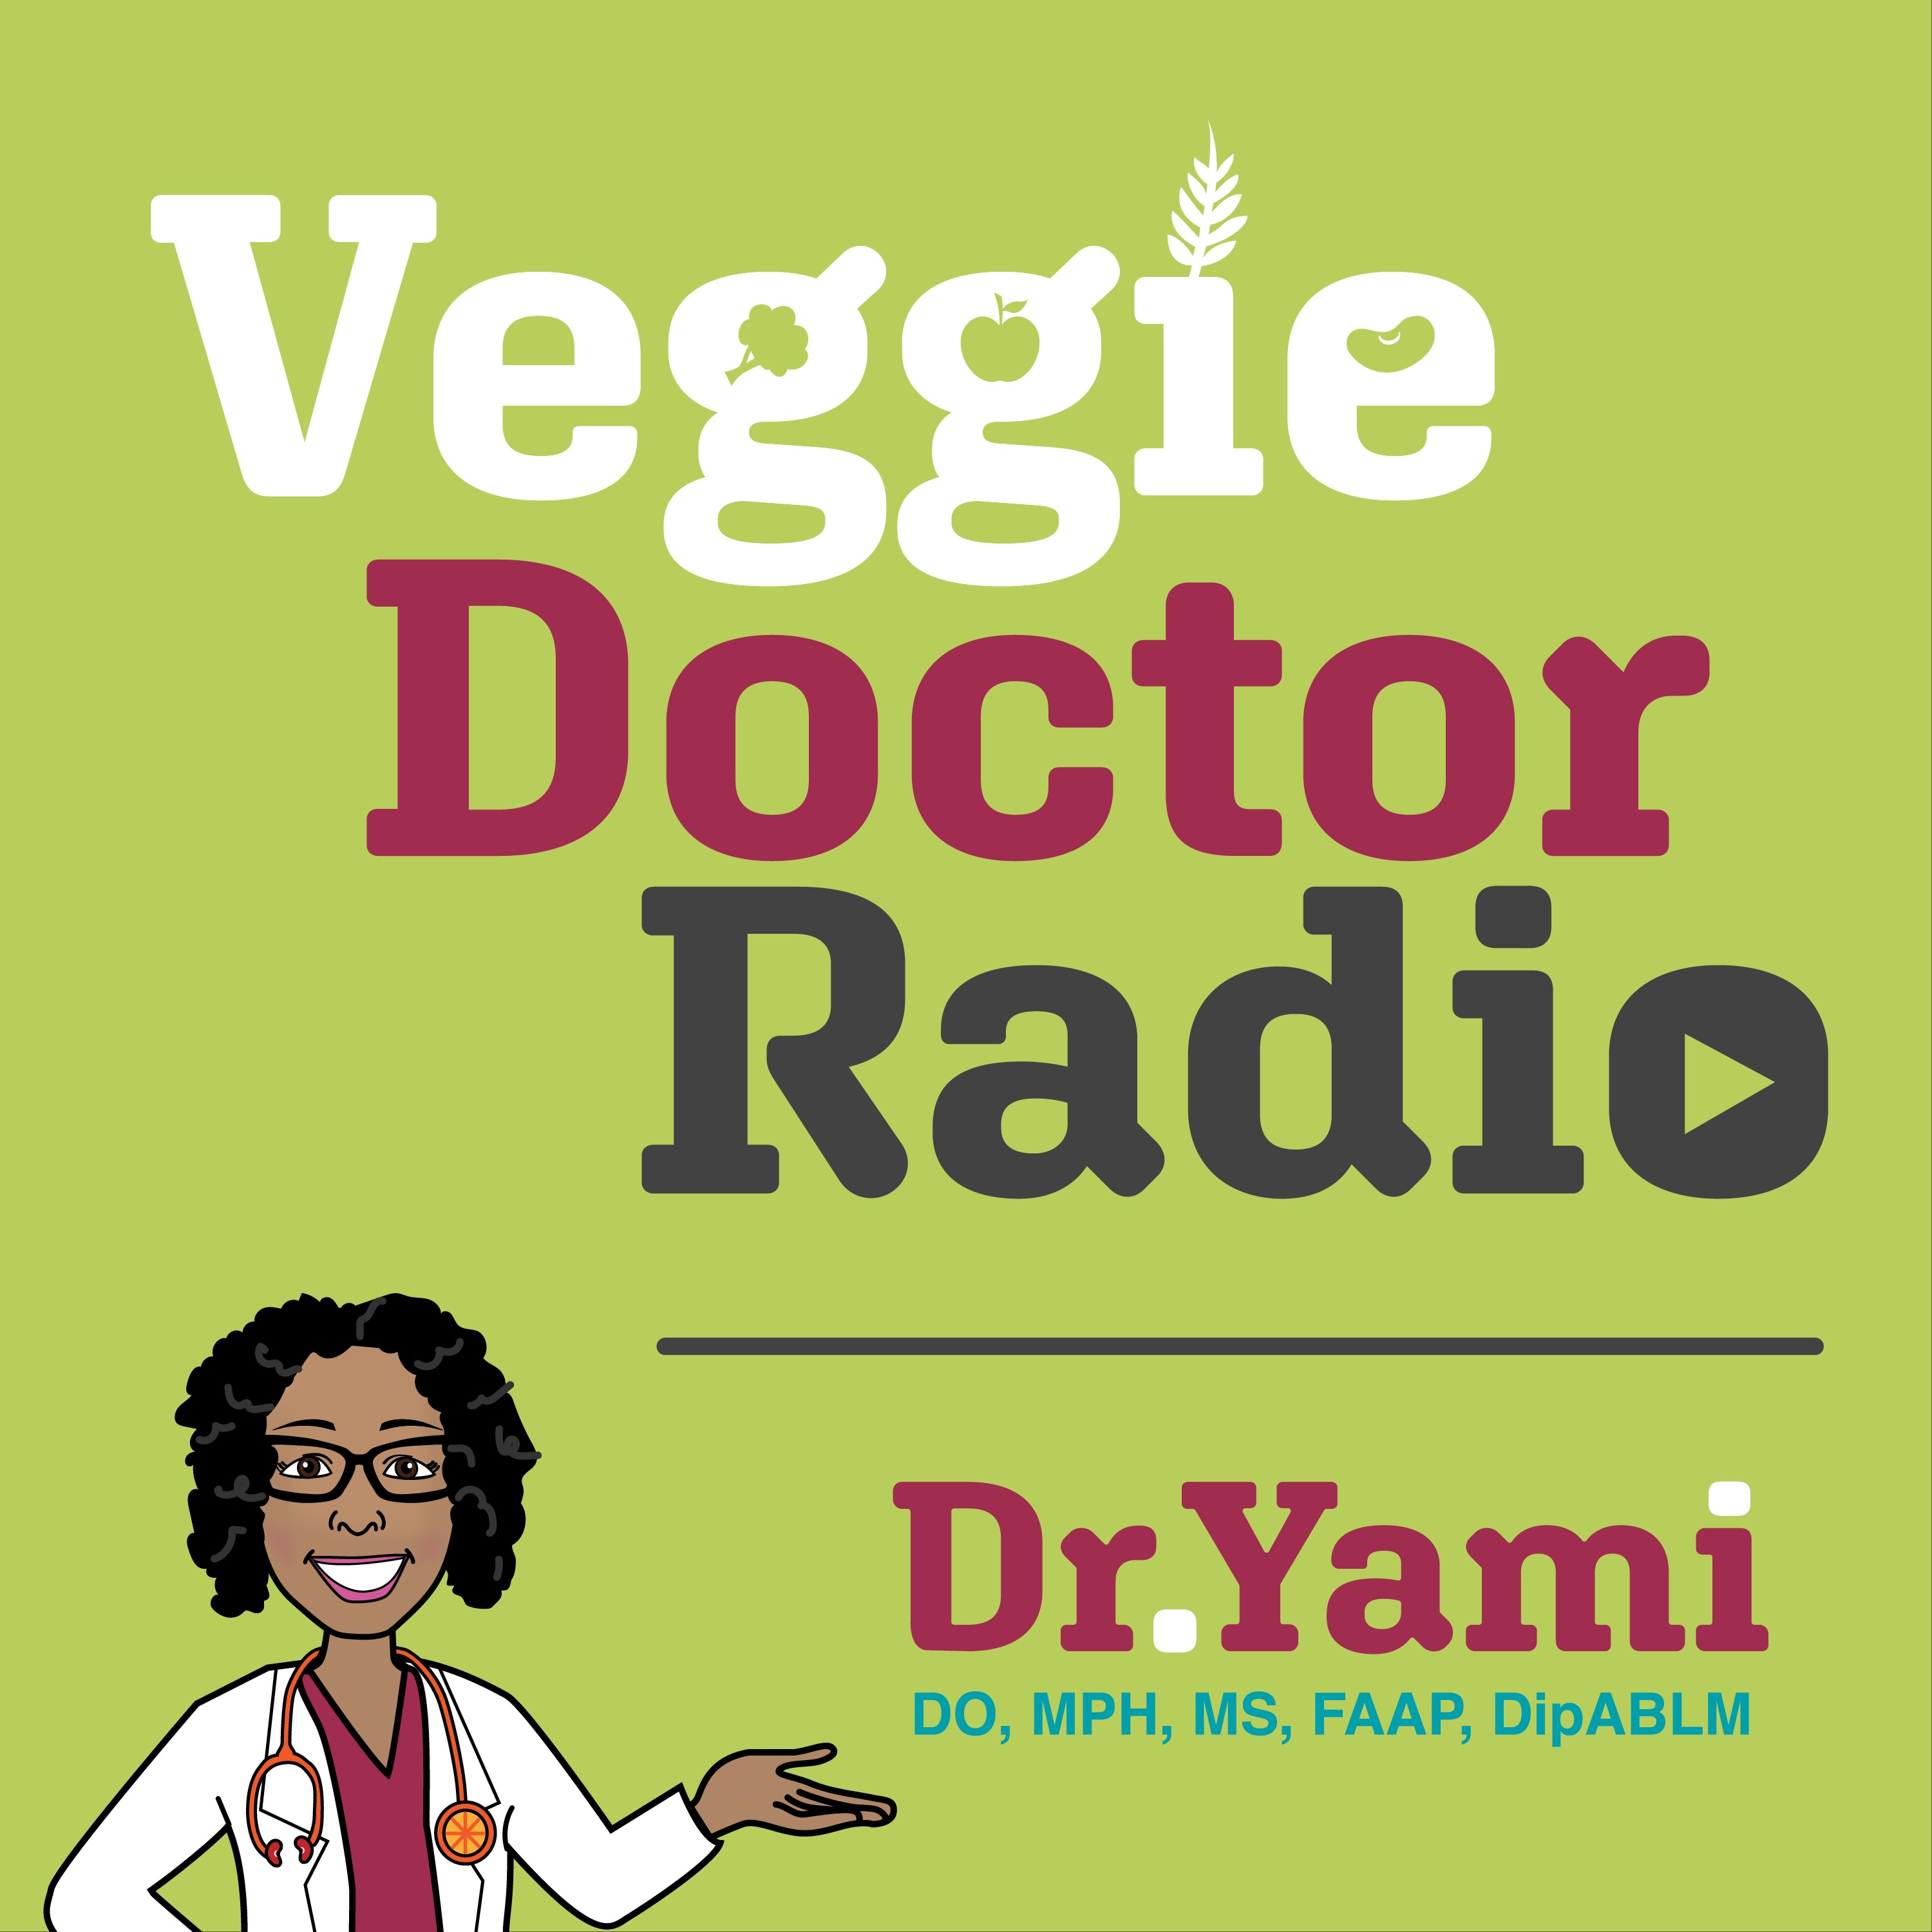 242: Learn to Cook Really Good Food Starting Today with Brigitte Gemme (Veggie Doctor Radio)